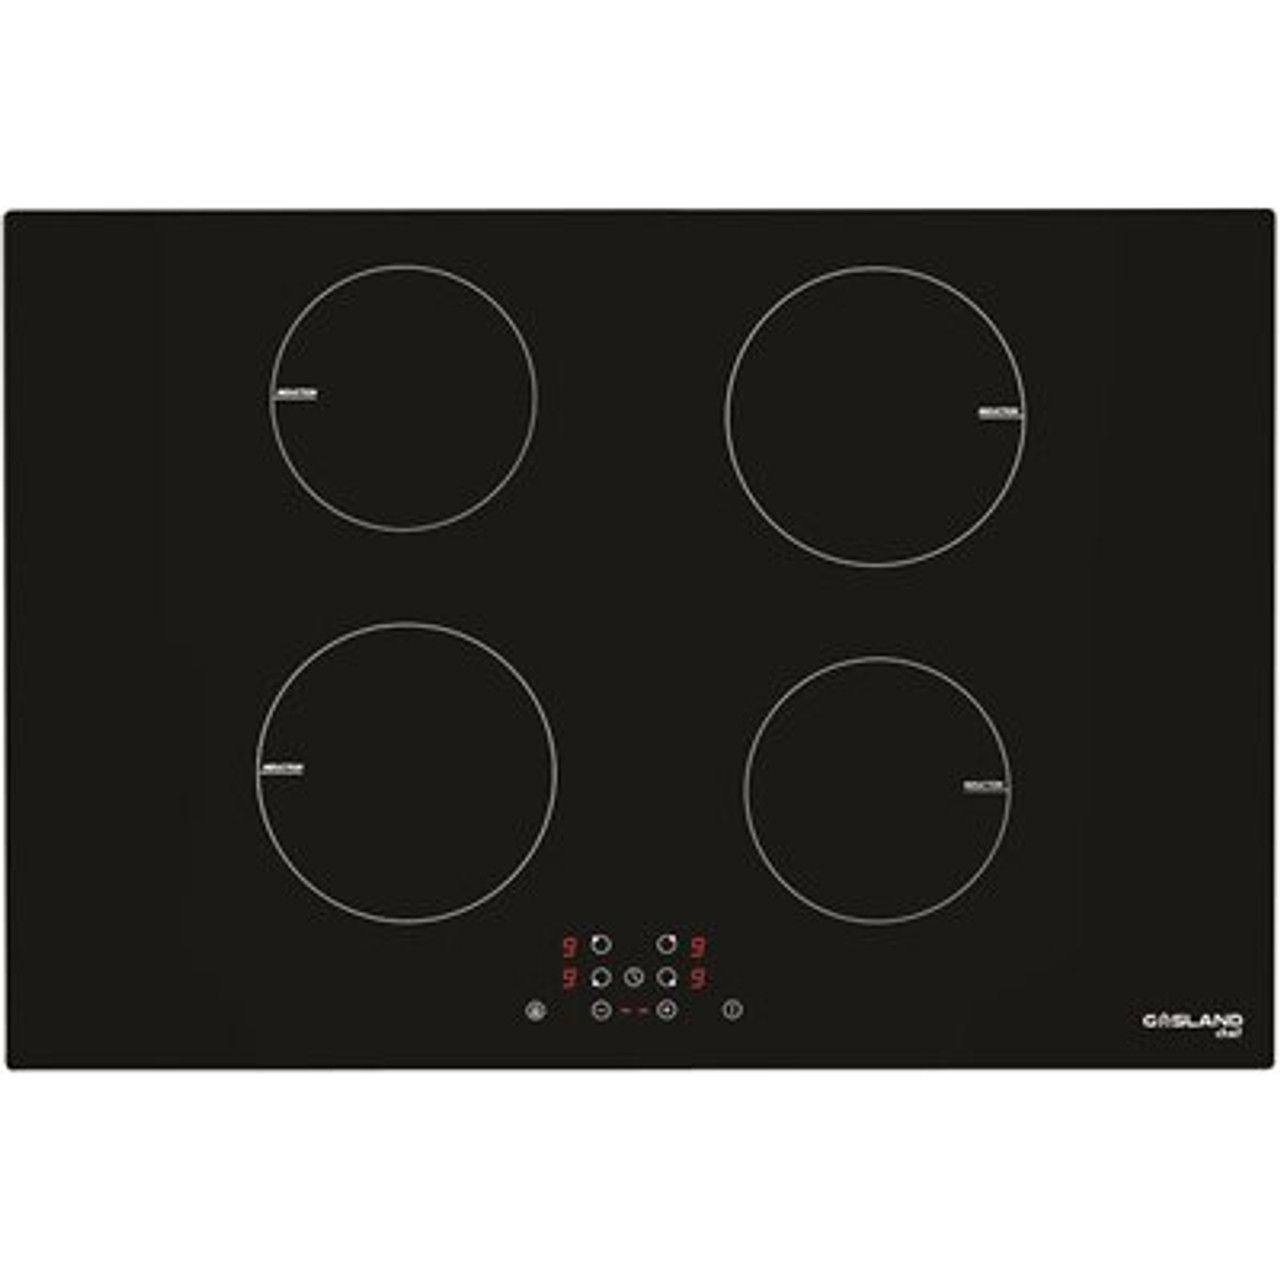 GASLAND Chef 30 in. Vitro Ceramic Surface Built-In Induction Electric Modular Cooktop in Black with 4-Elements